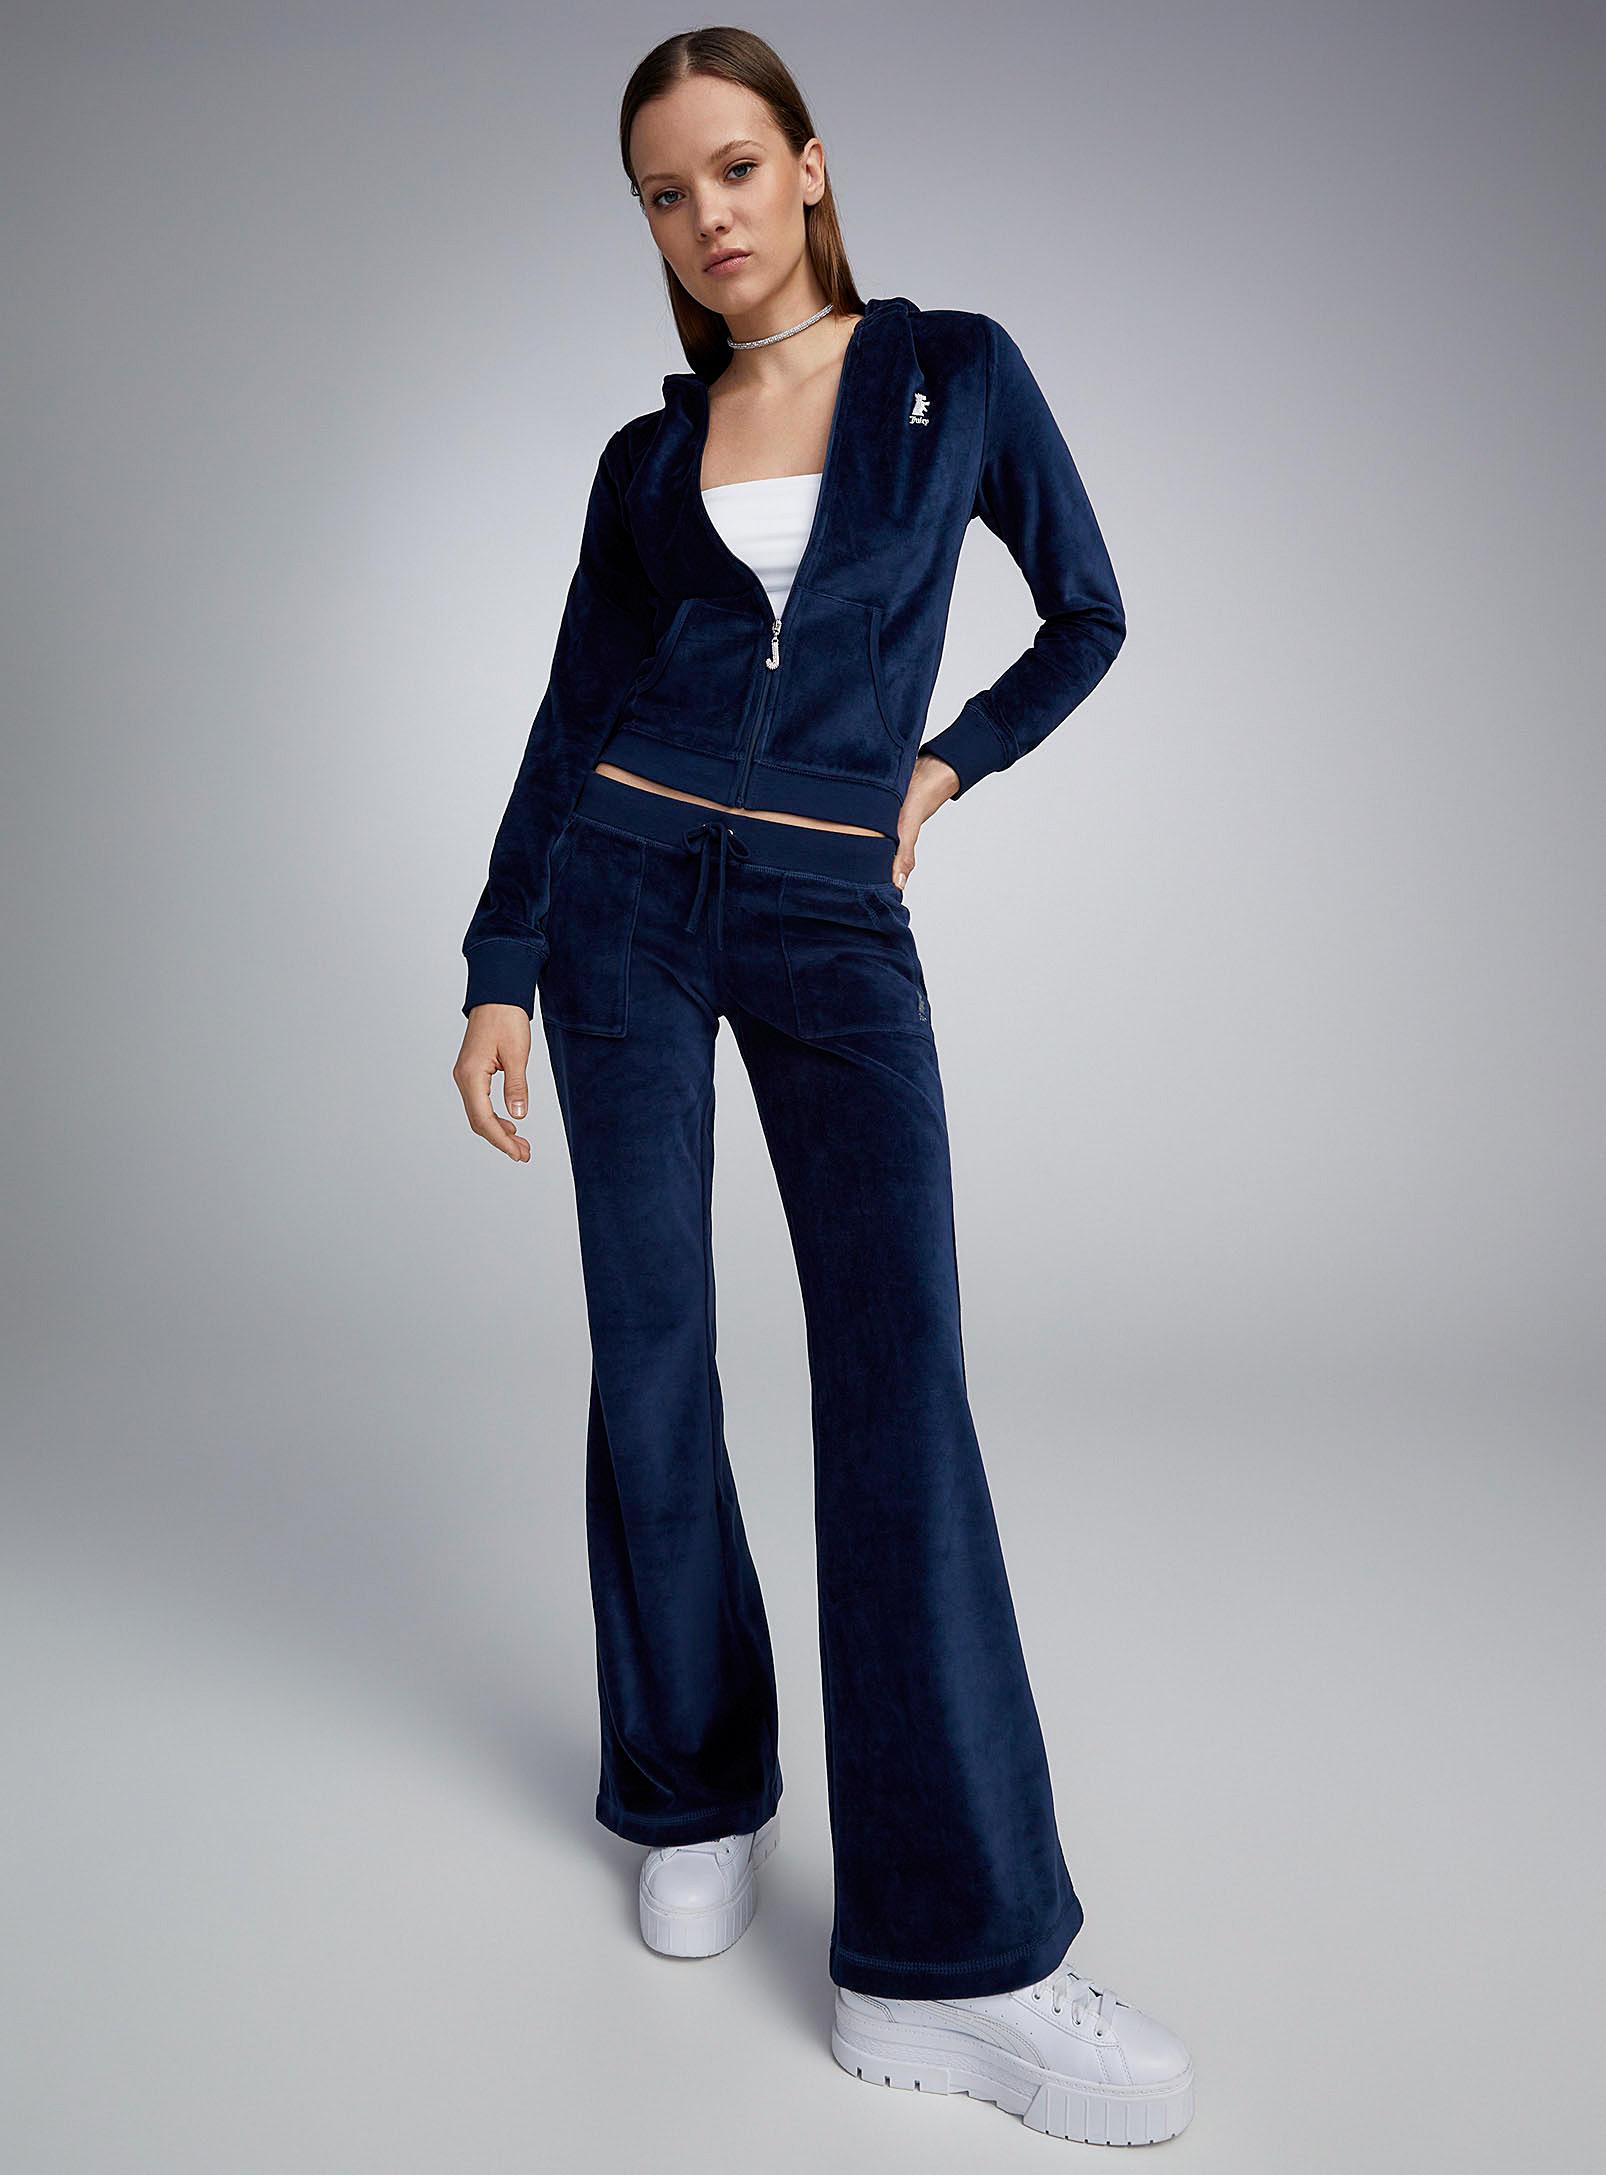 Juicy Couture Midnight Blue Flared Velvet Pant